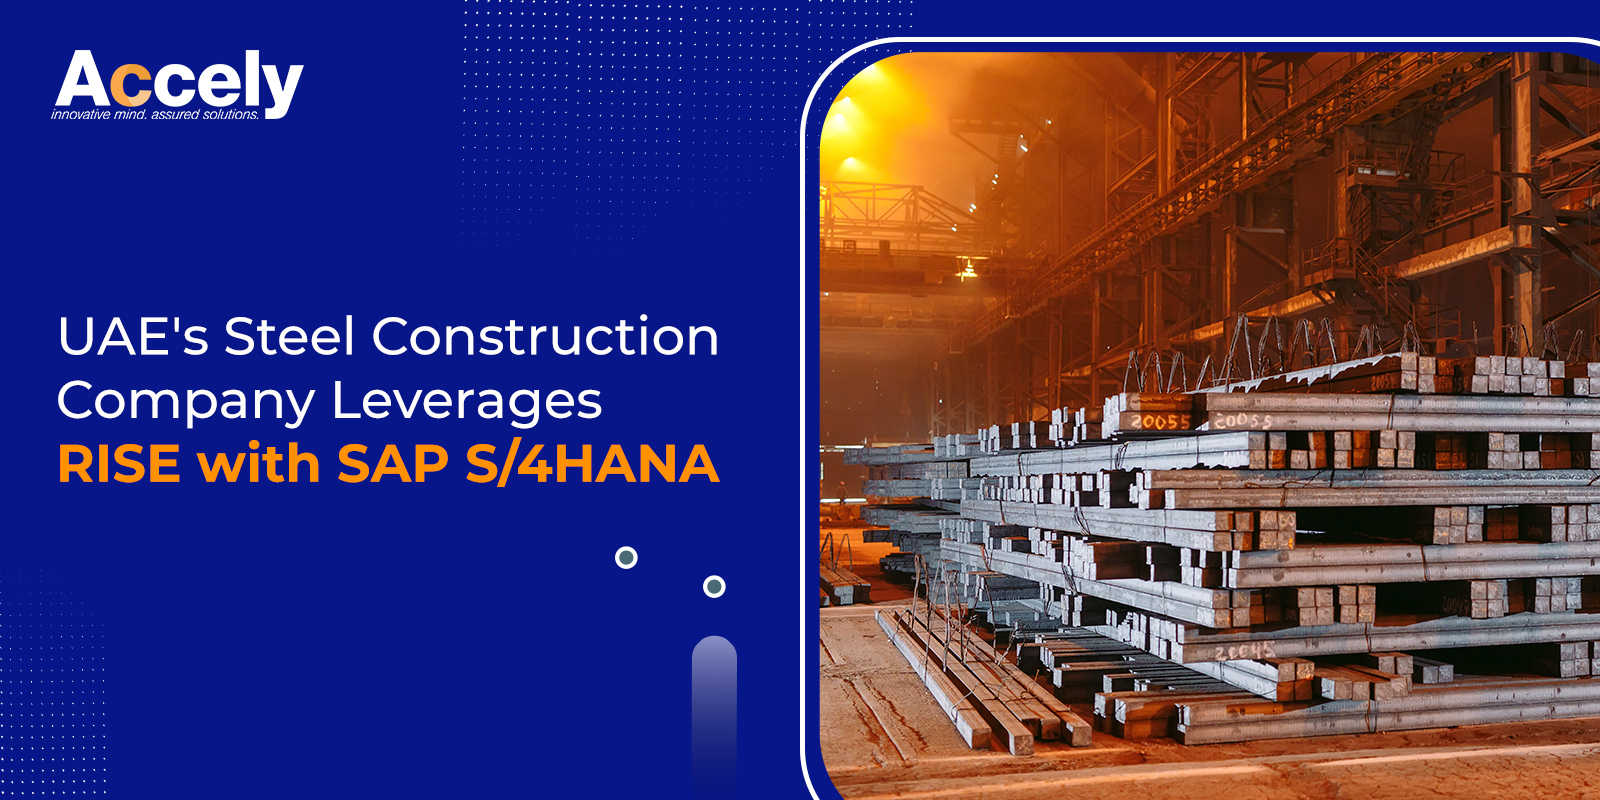 UAE's Steel Construction Company Leverages RISE with SAP S/4HANA